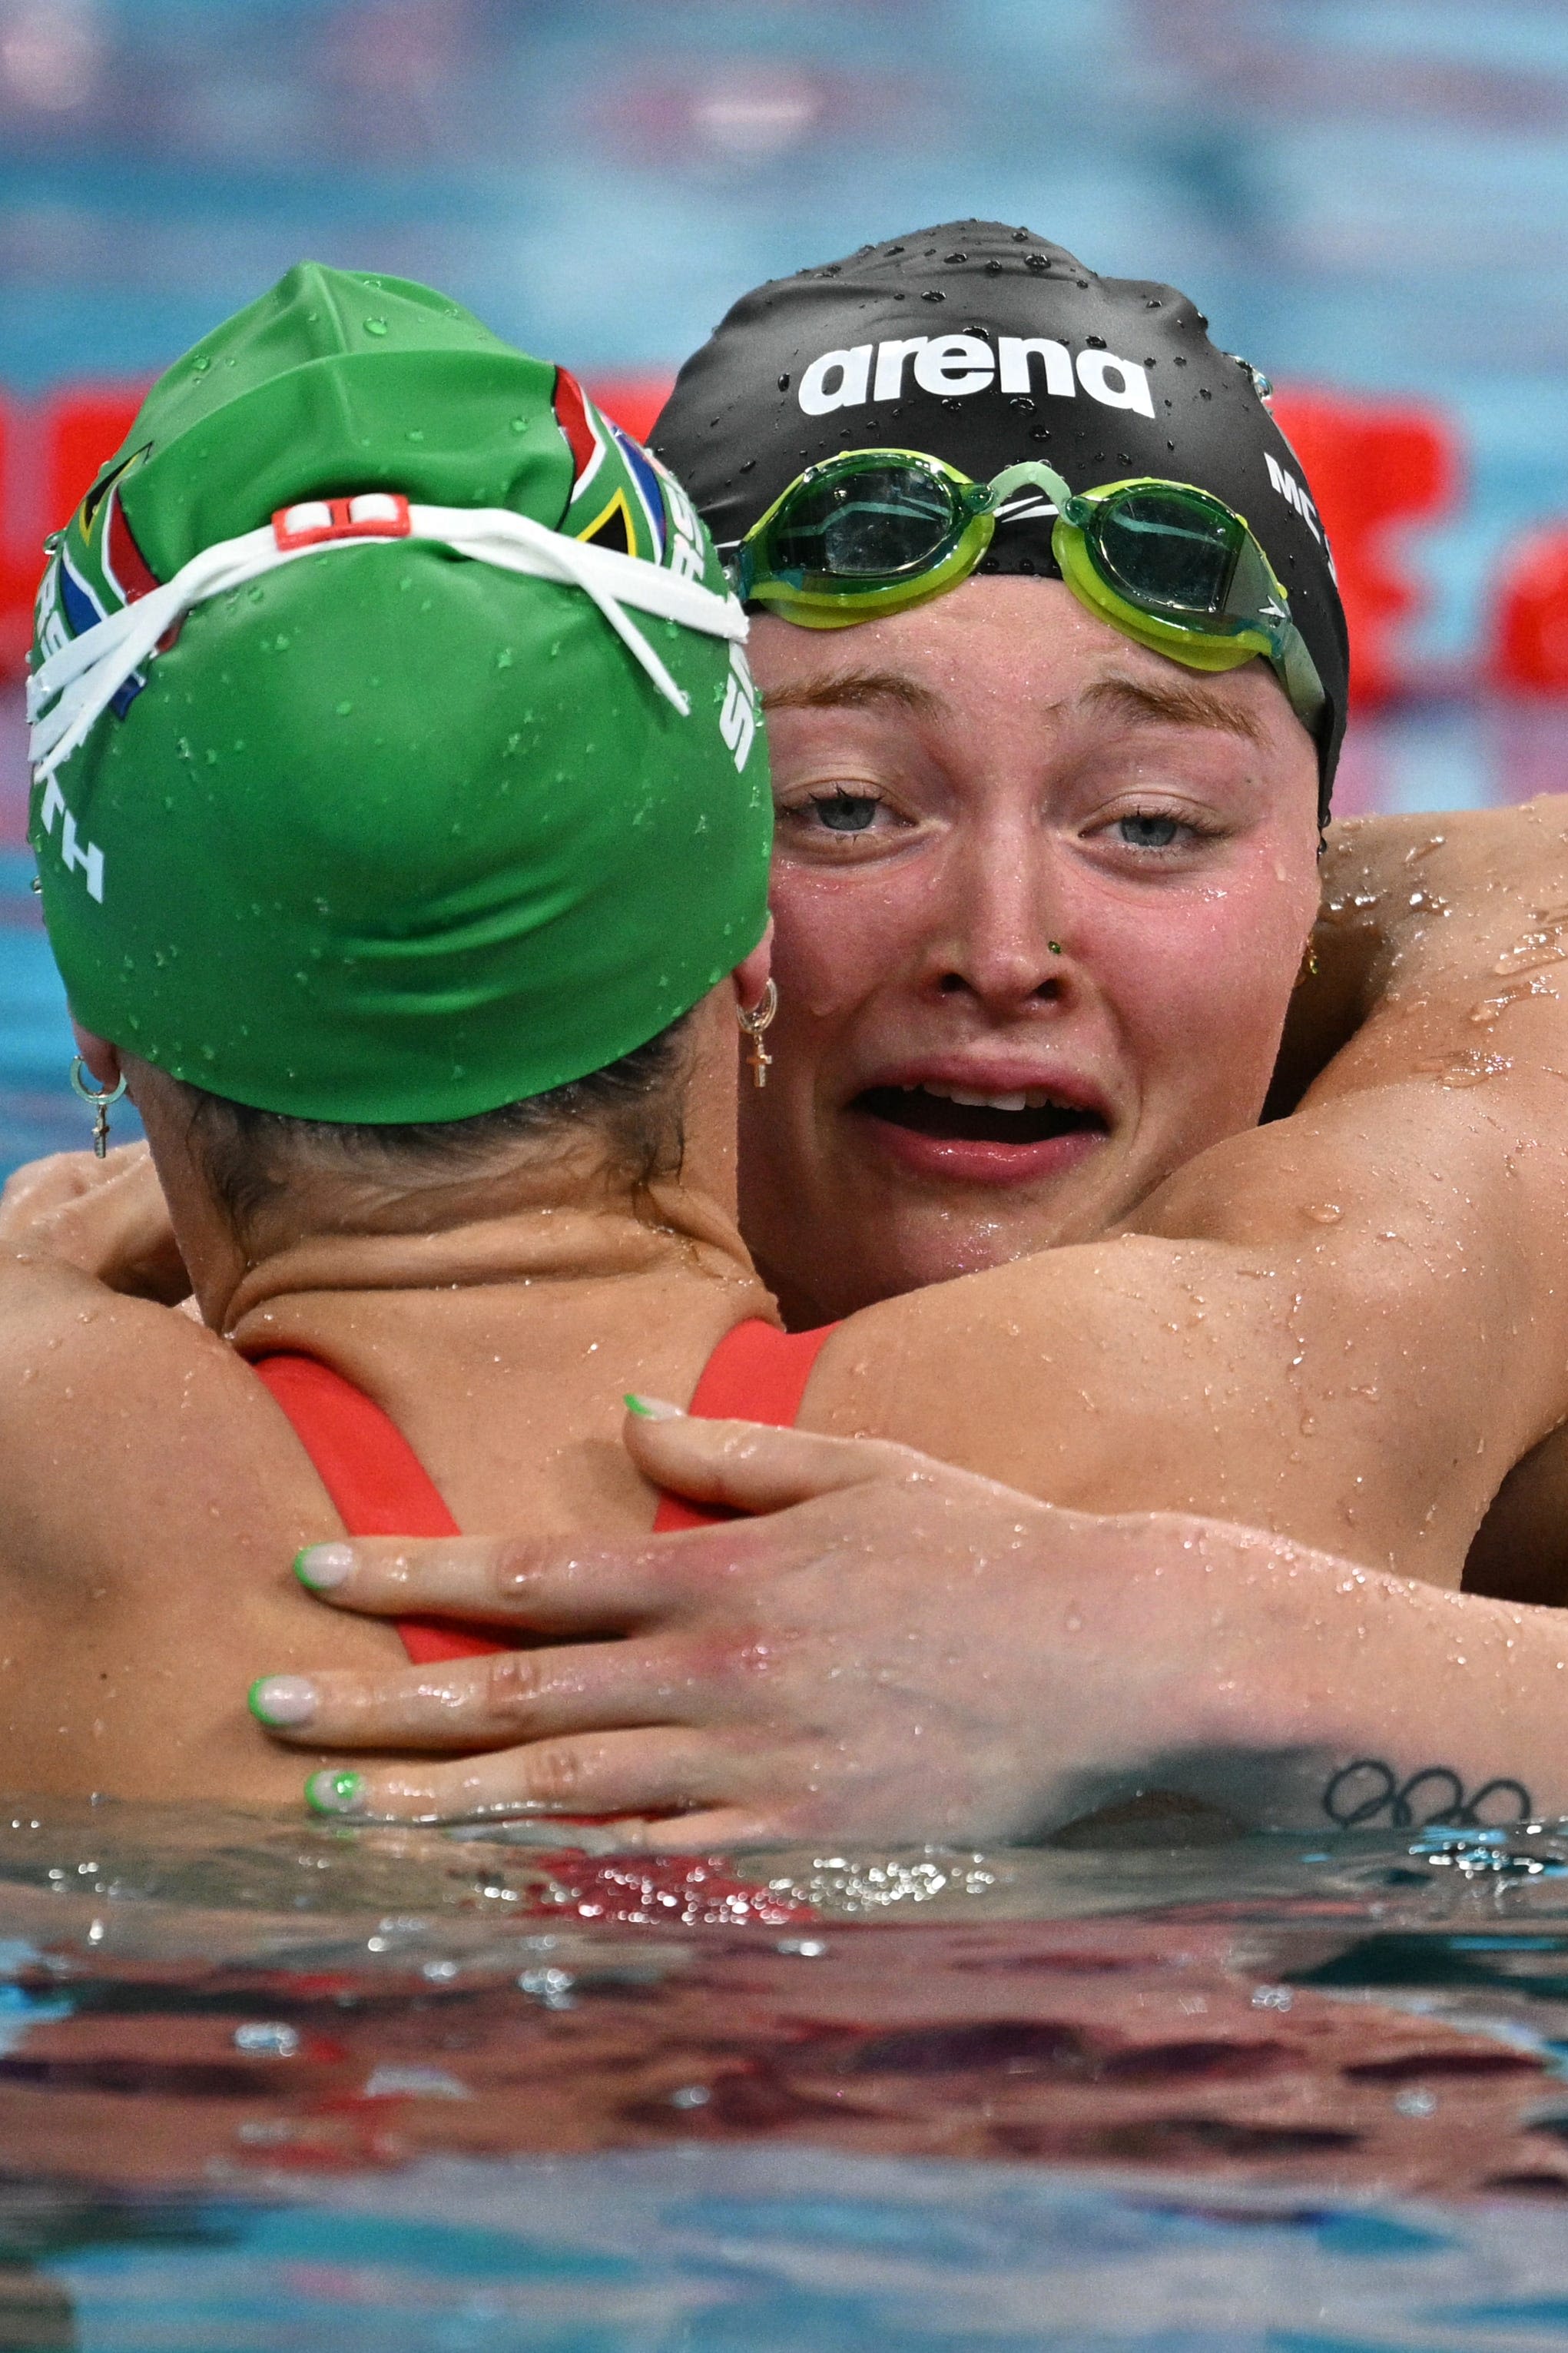 Former Tennessee swimming star Mona McSharry wins bronze in 100 breaststroke at Paris Olympics